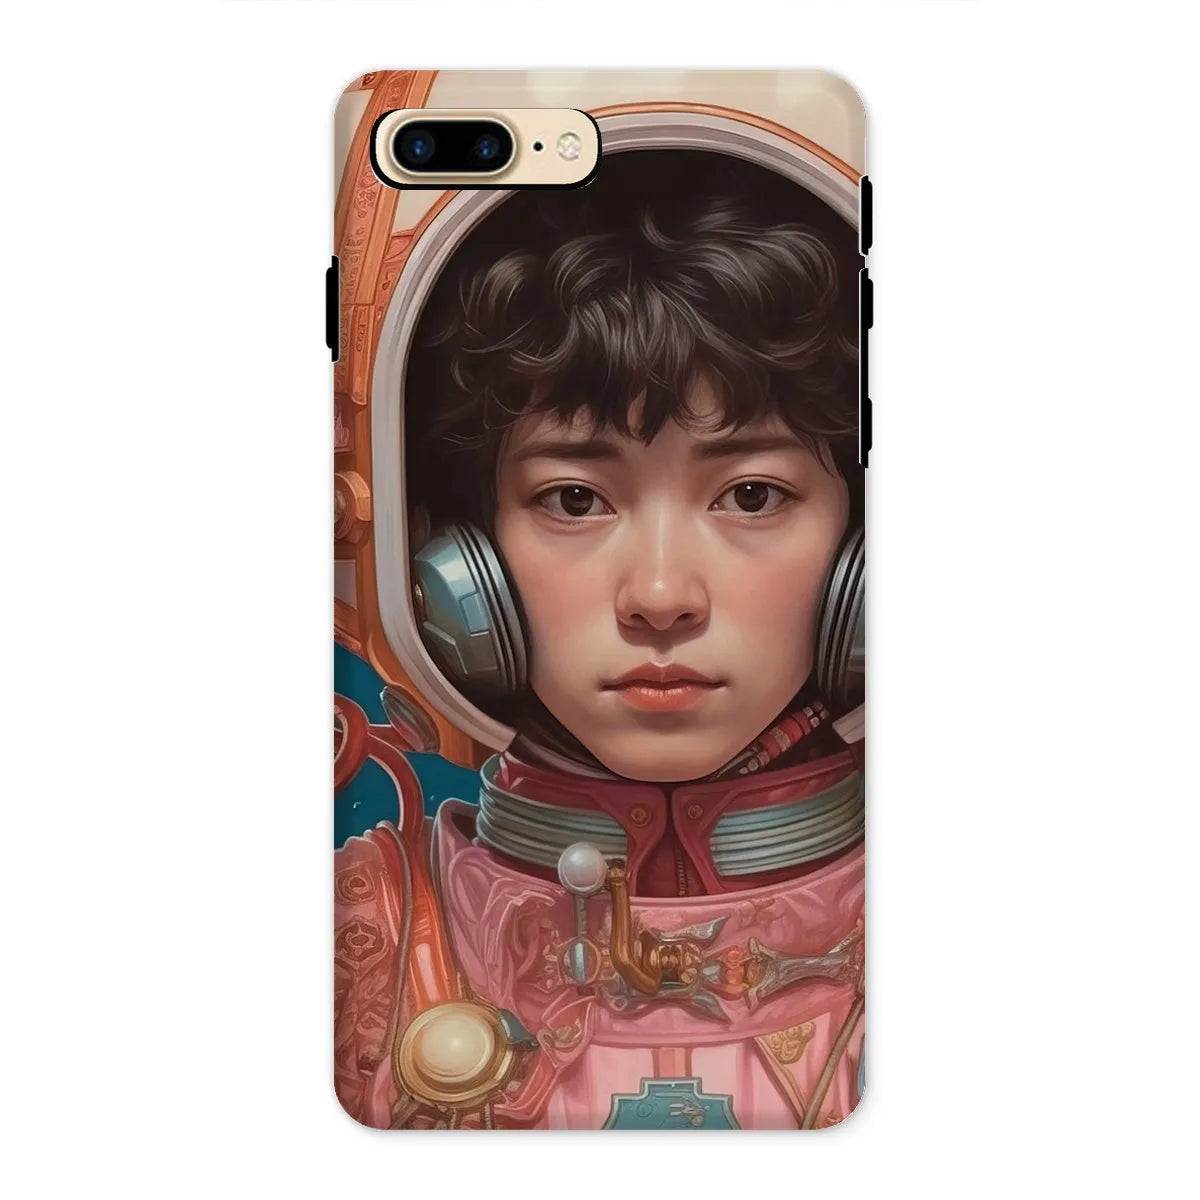 Kaito The Gay Astronaut - Lgbtq Art Phone Case - Iphone 8 Plus / Matte - Mobile Phone Cases - Aesthetic Art